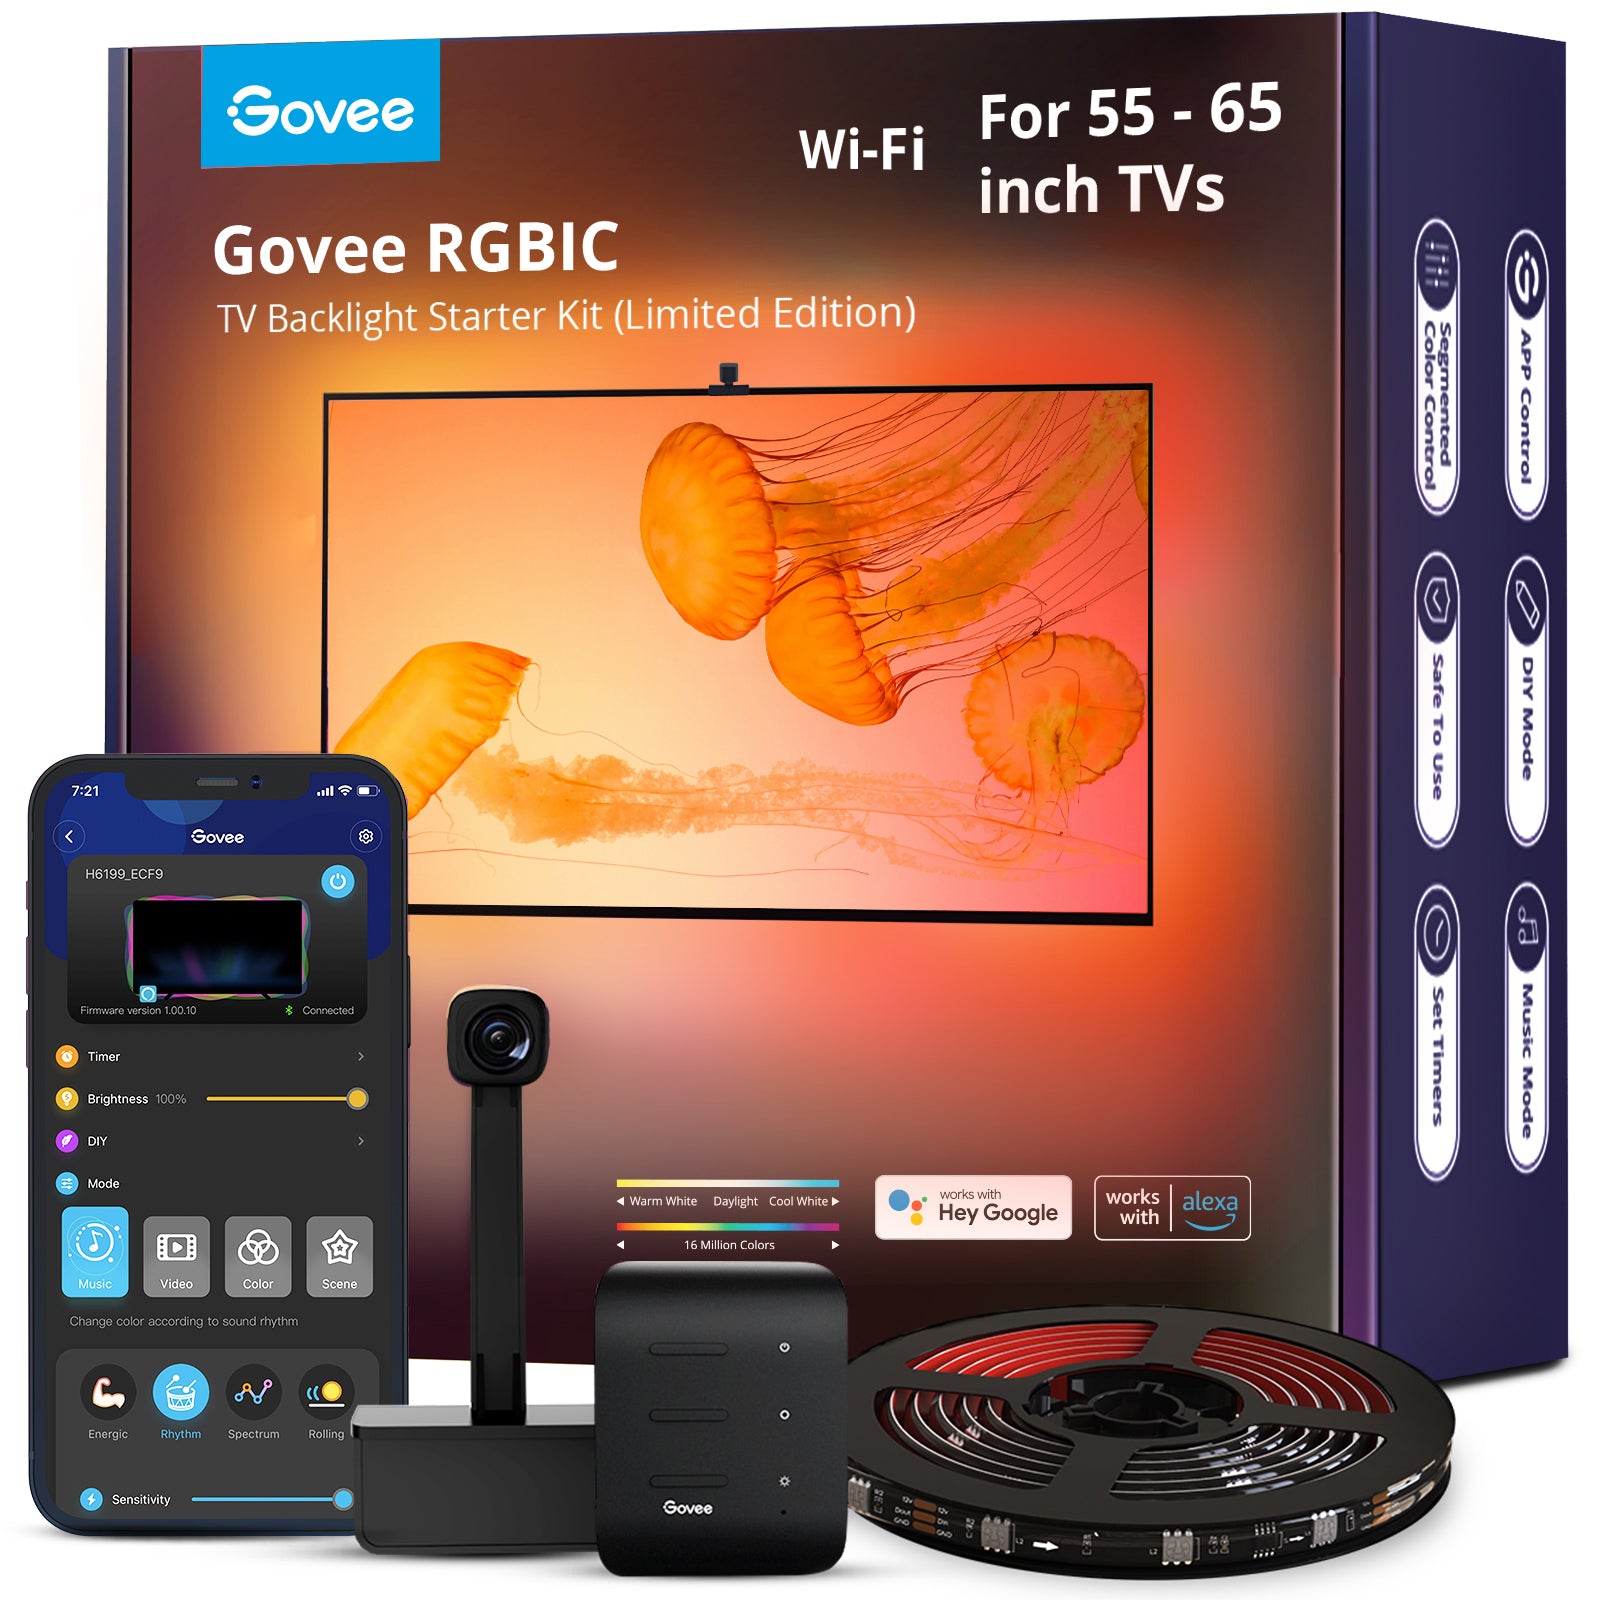 Govee RGBIC TV Backlight Starter Kit 55"-65" (Limited Edition)